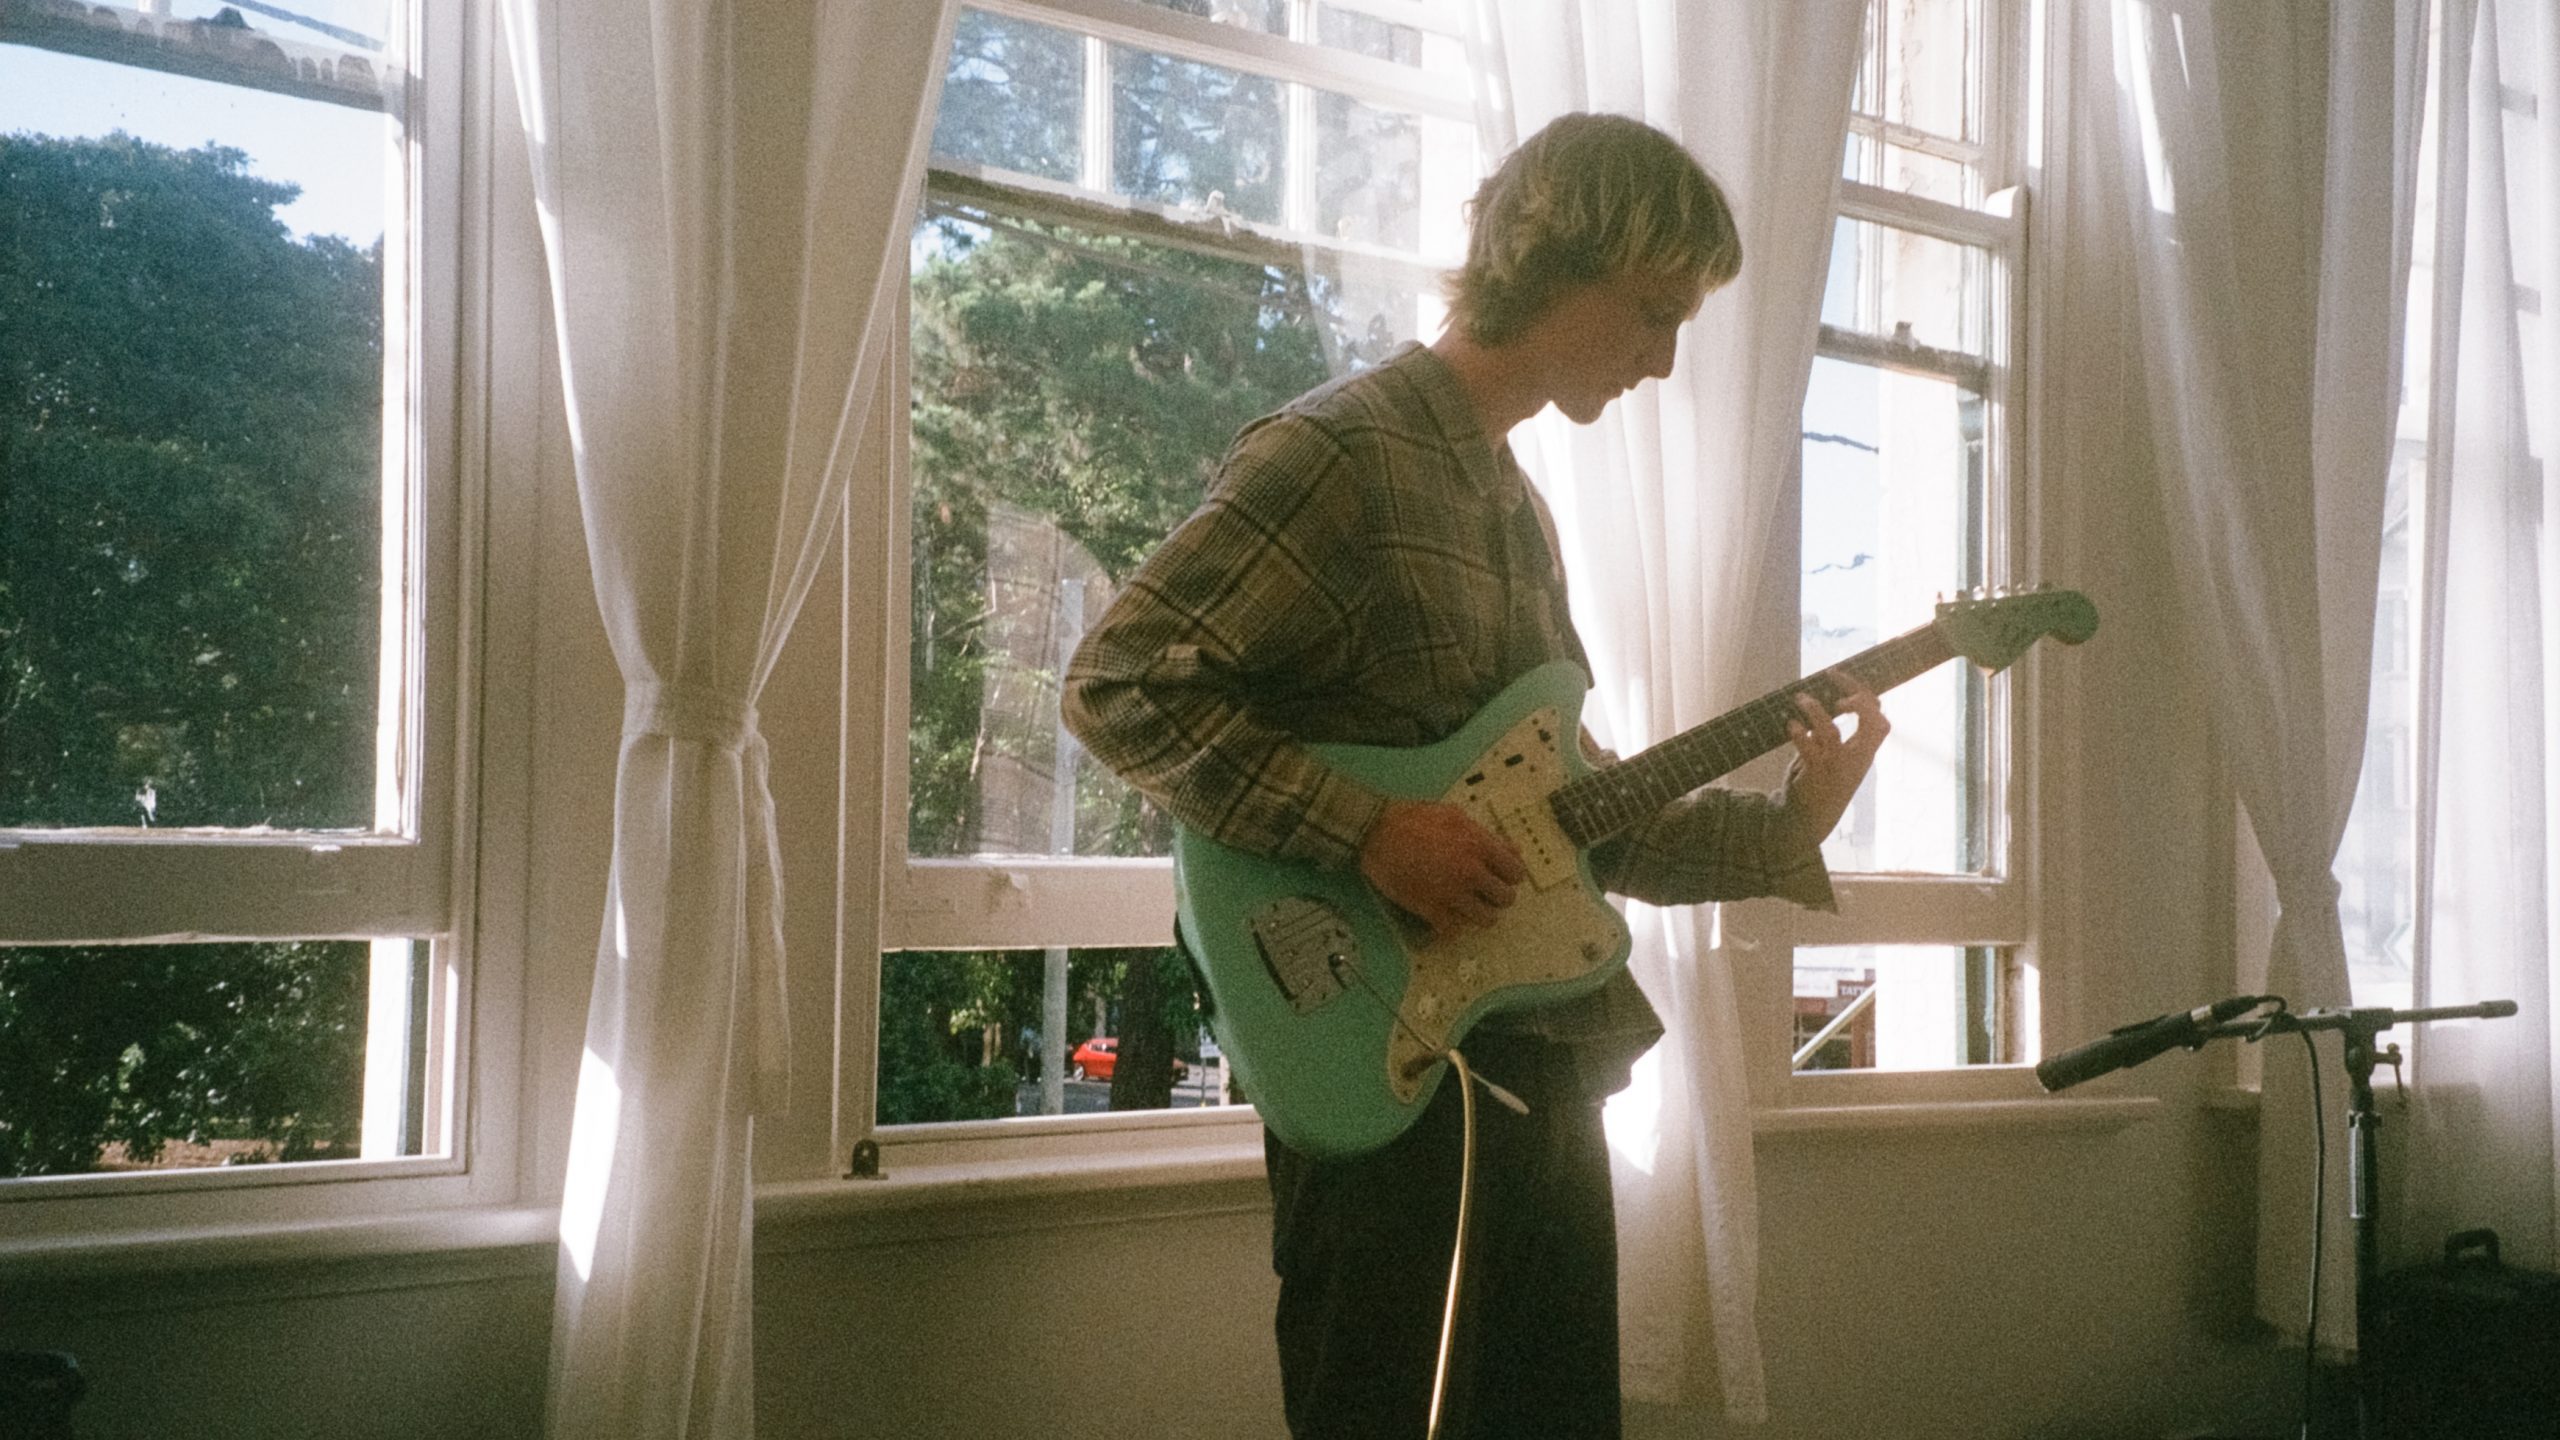 Musician Bluetung stands in a sunlit room, playing guitar